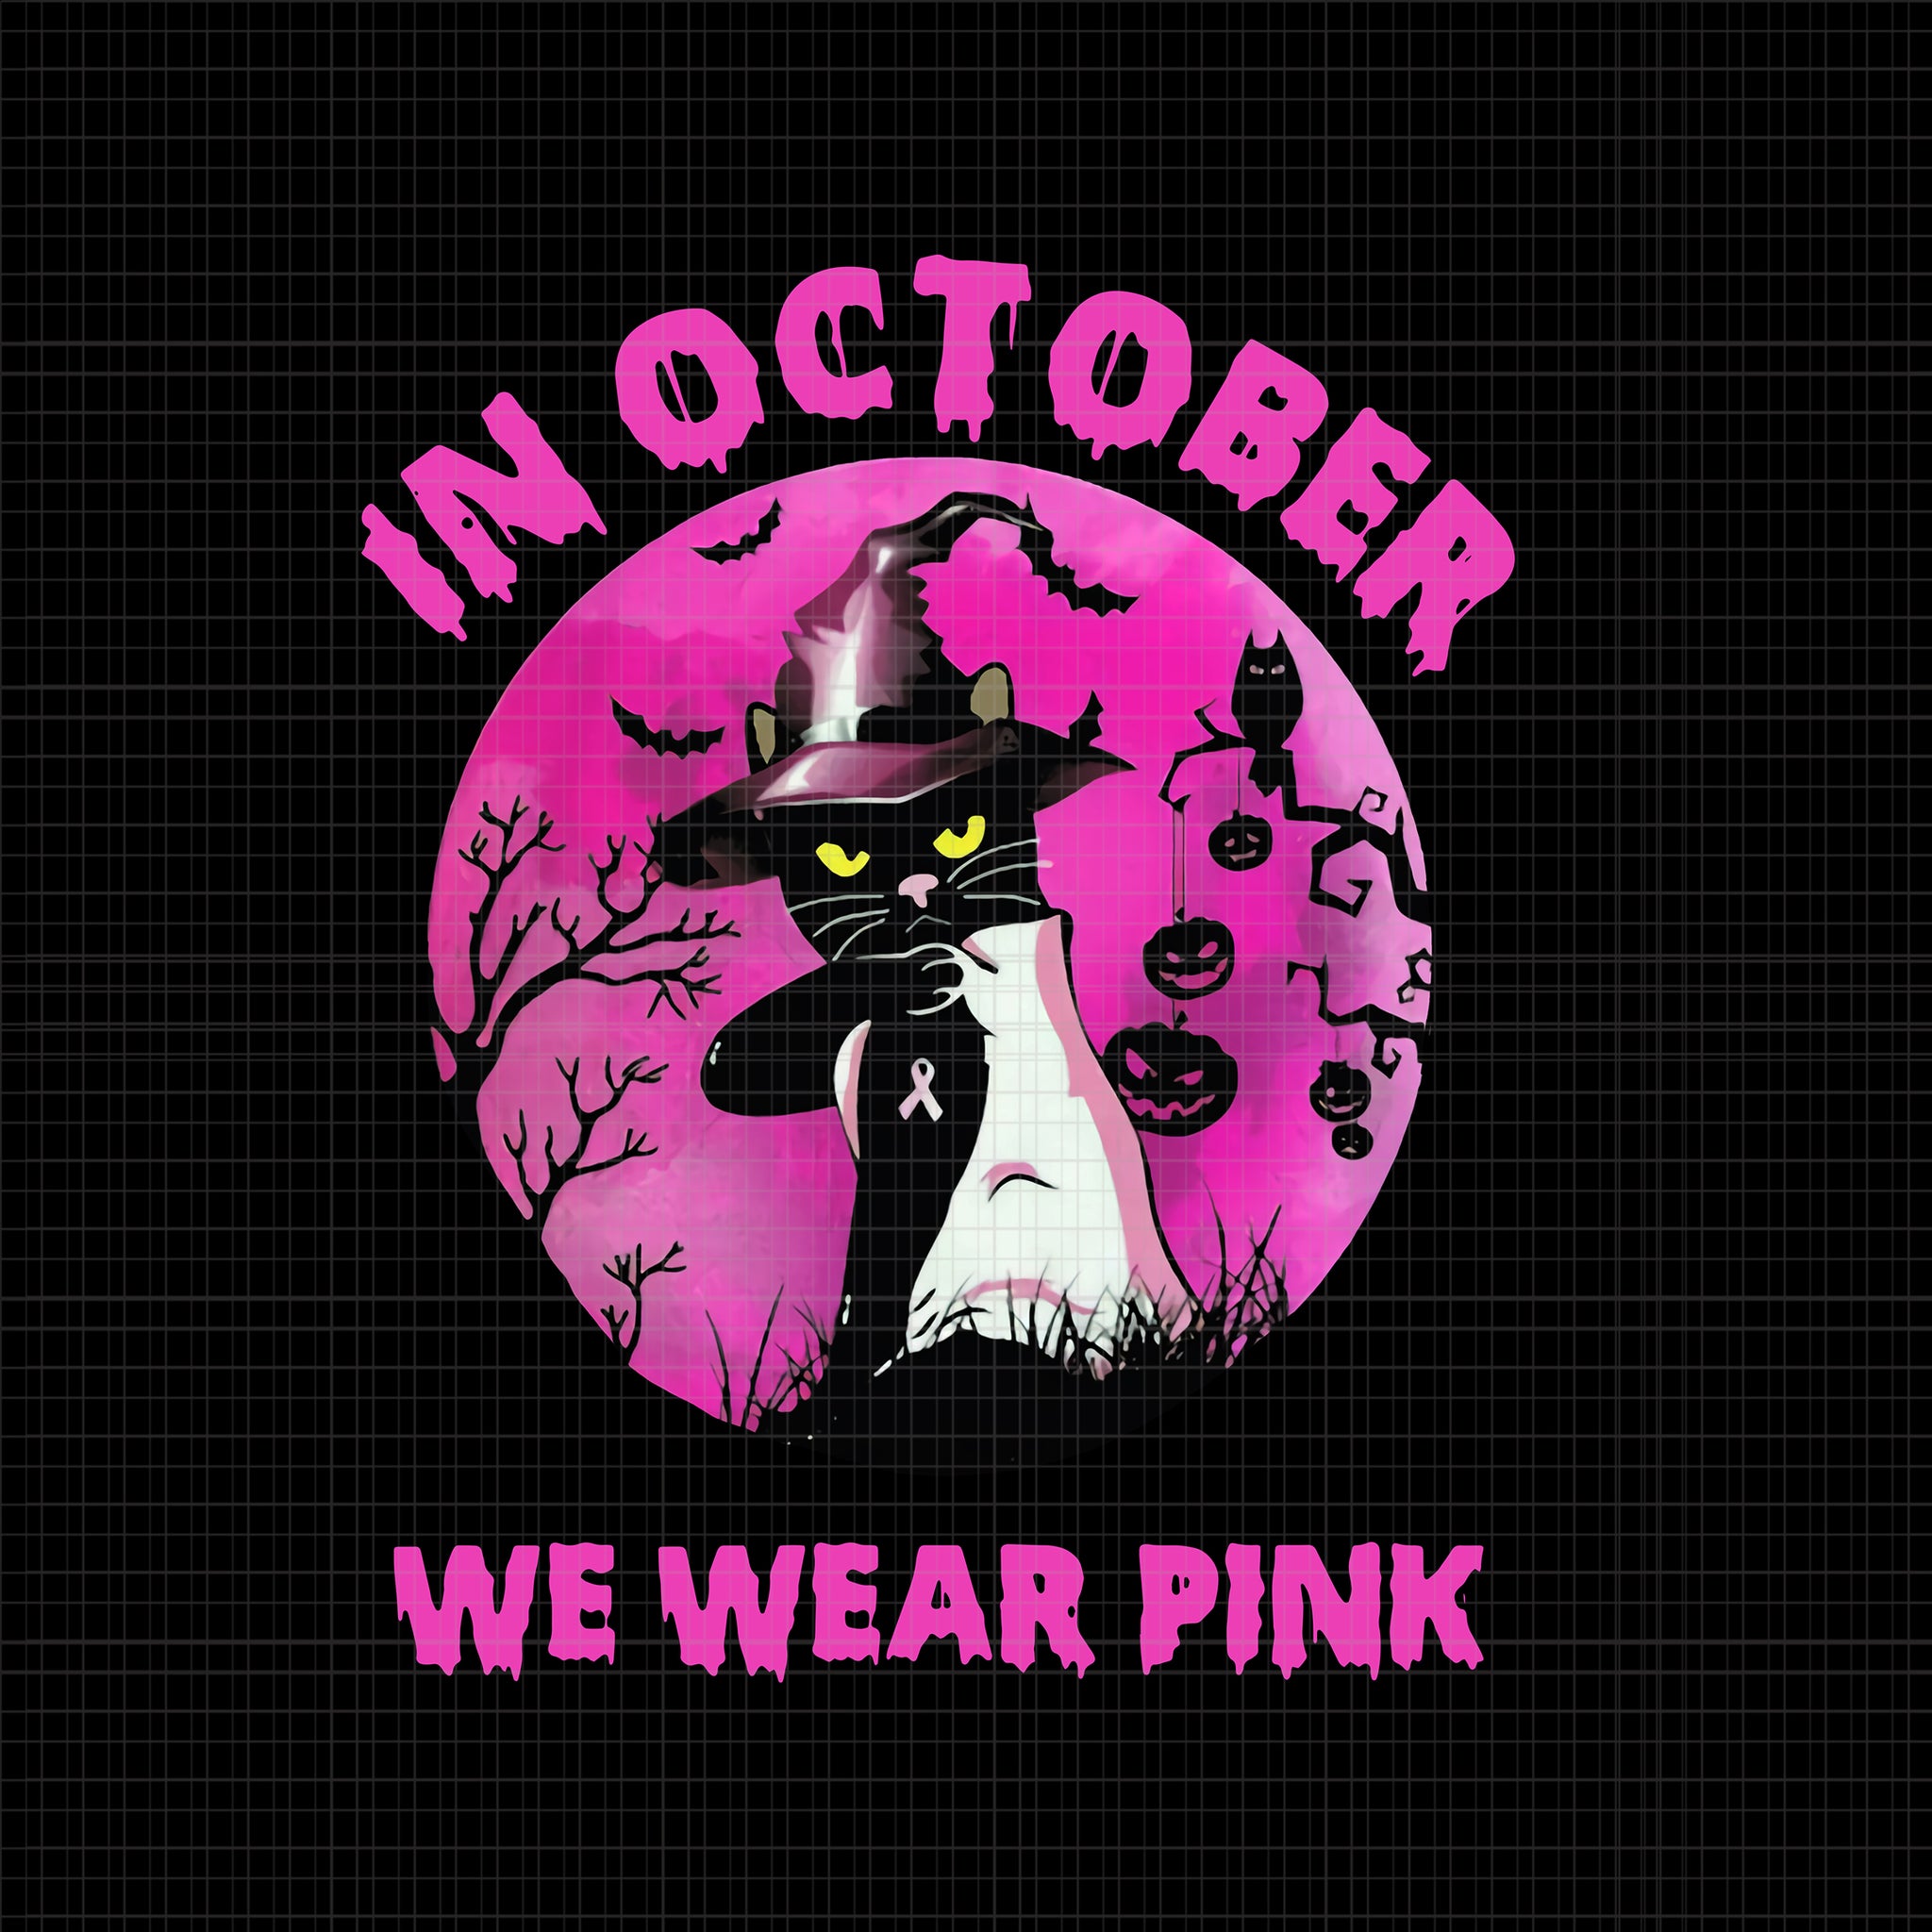 In October We Wear Pink Cat, Breast Cancer Awareness png, Pink Cancer Warrior png, Pink Ribbon, Halloween Pumpkin, Pink Ribbon Png, Autumn Png